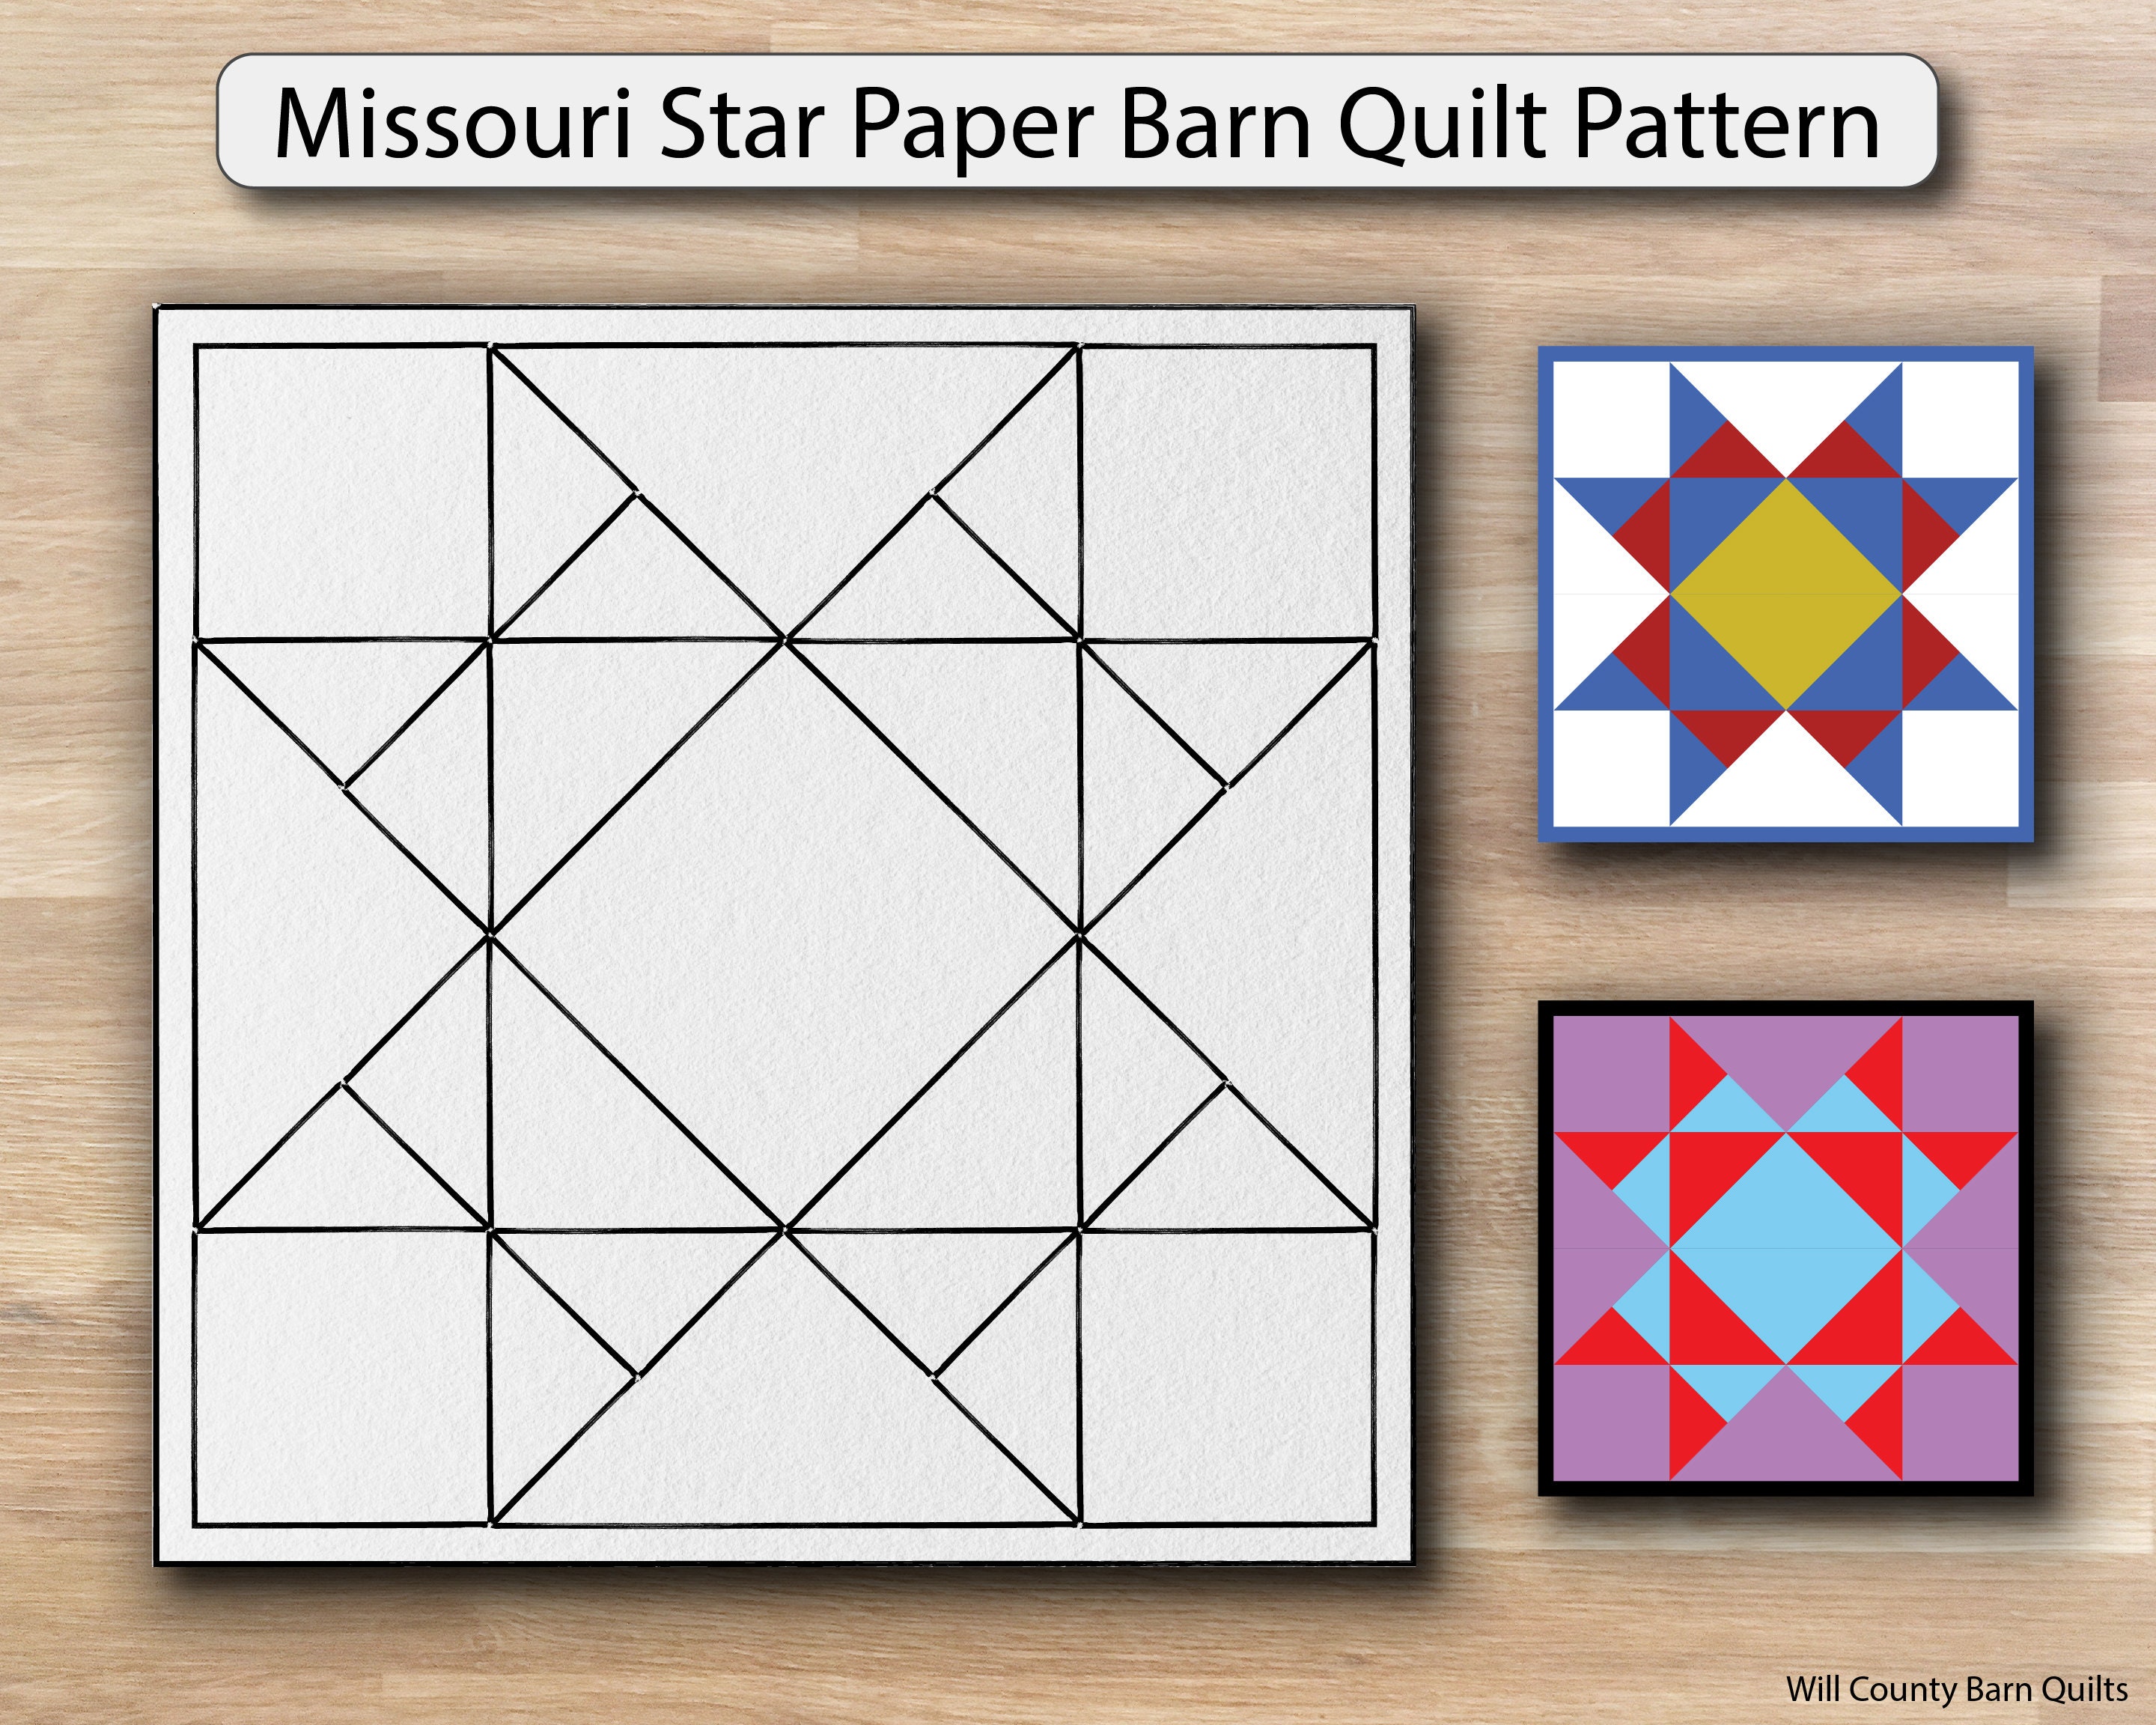 Quilt As You Go 5 Square Star Quilt Pattern by Missouri Star